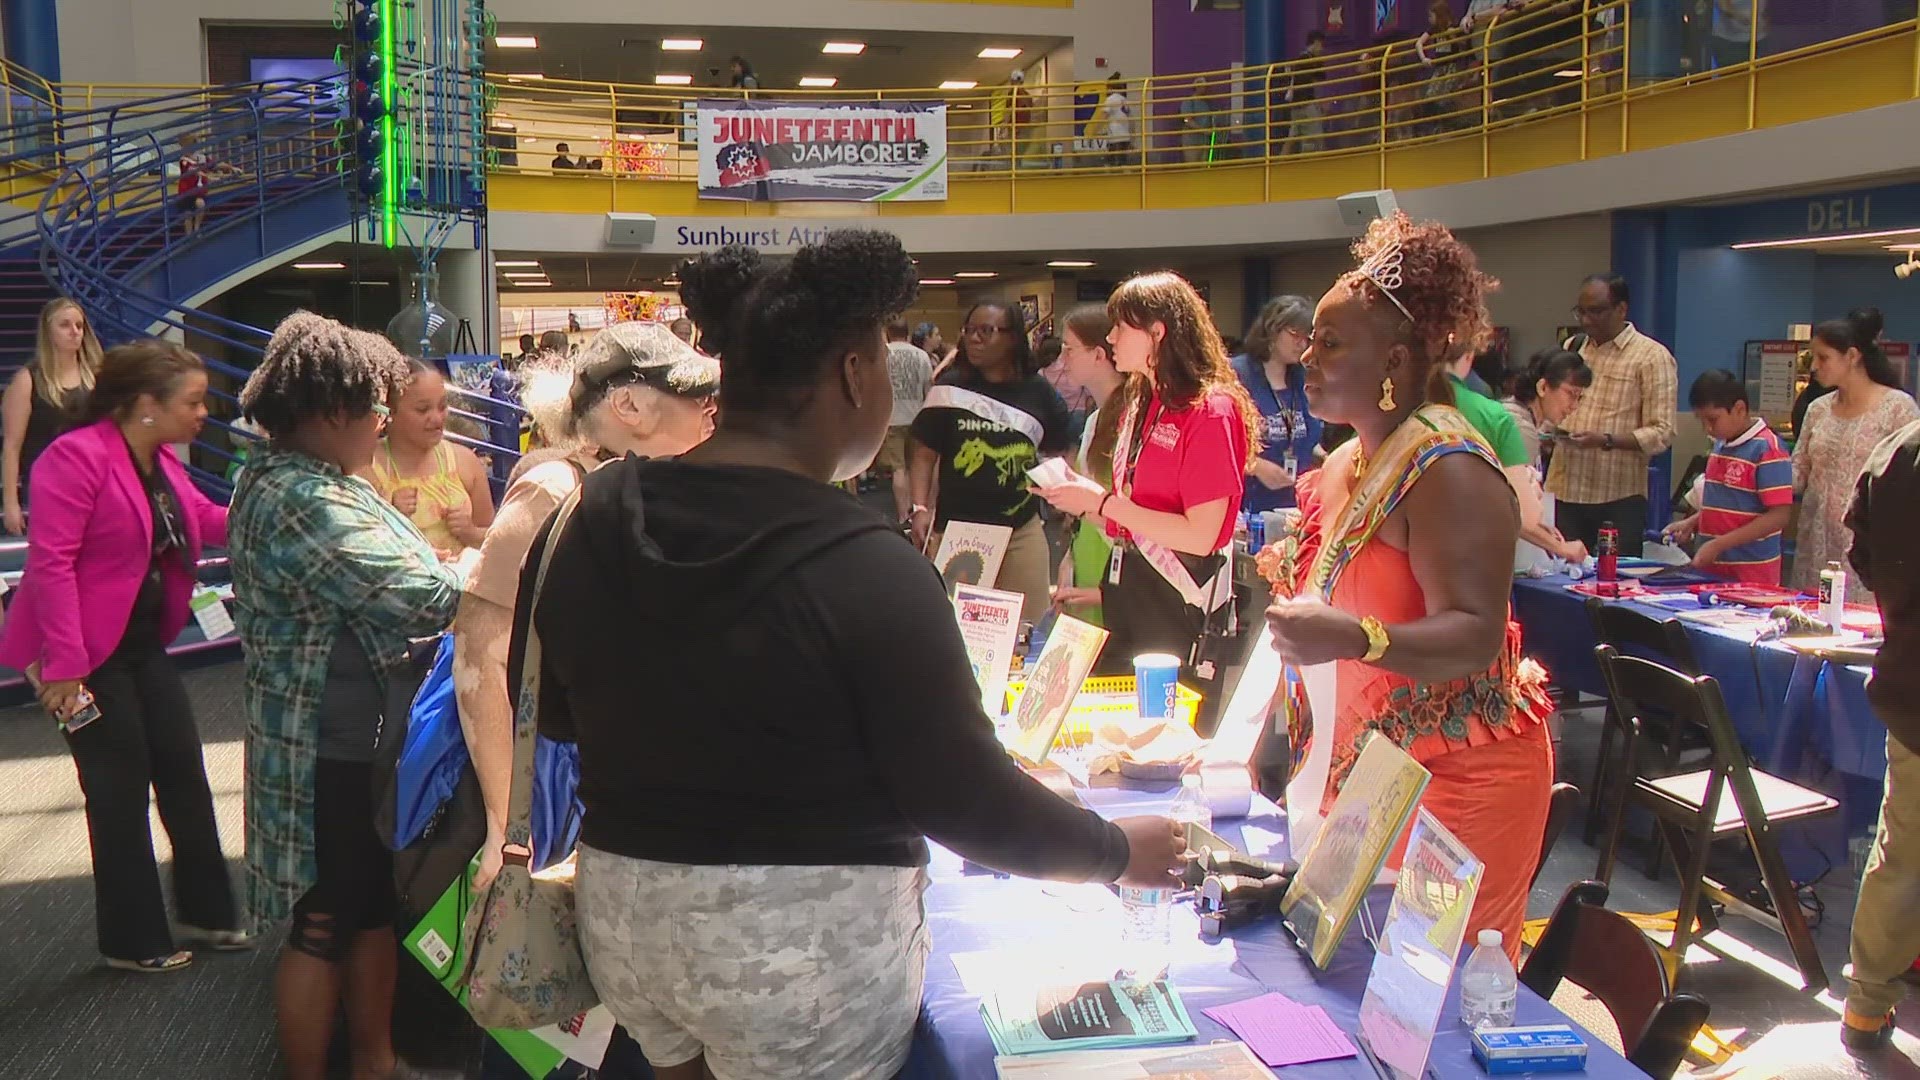 The world's largest children's museum hosted its annual Juneteenth Jamboree from 10 a.m. to 3 p.m., offering free admission to those who registered in advance.